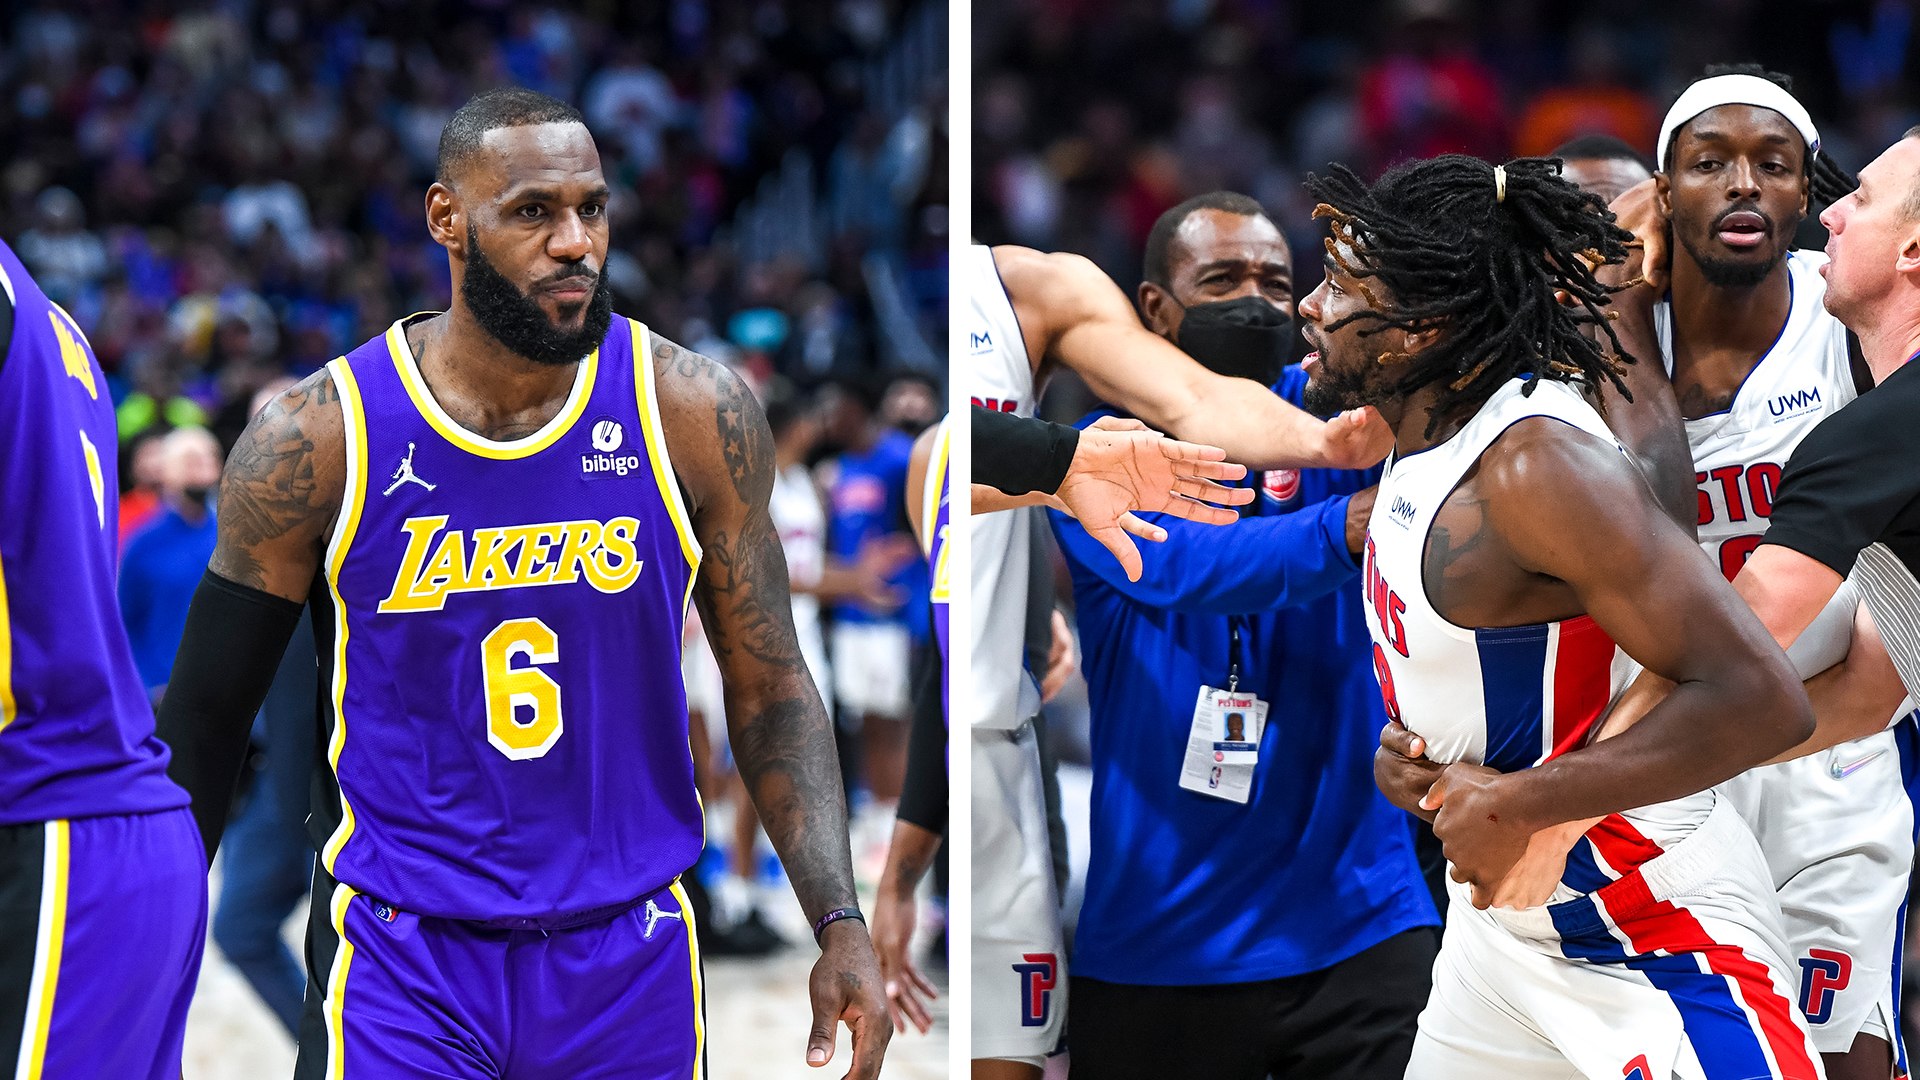 Lakers' LeBron James, Pistons' Isaiah Stewart face suspensions